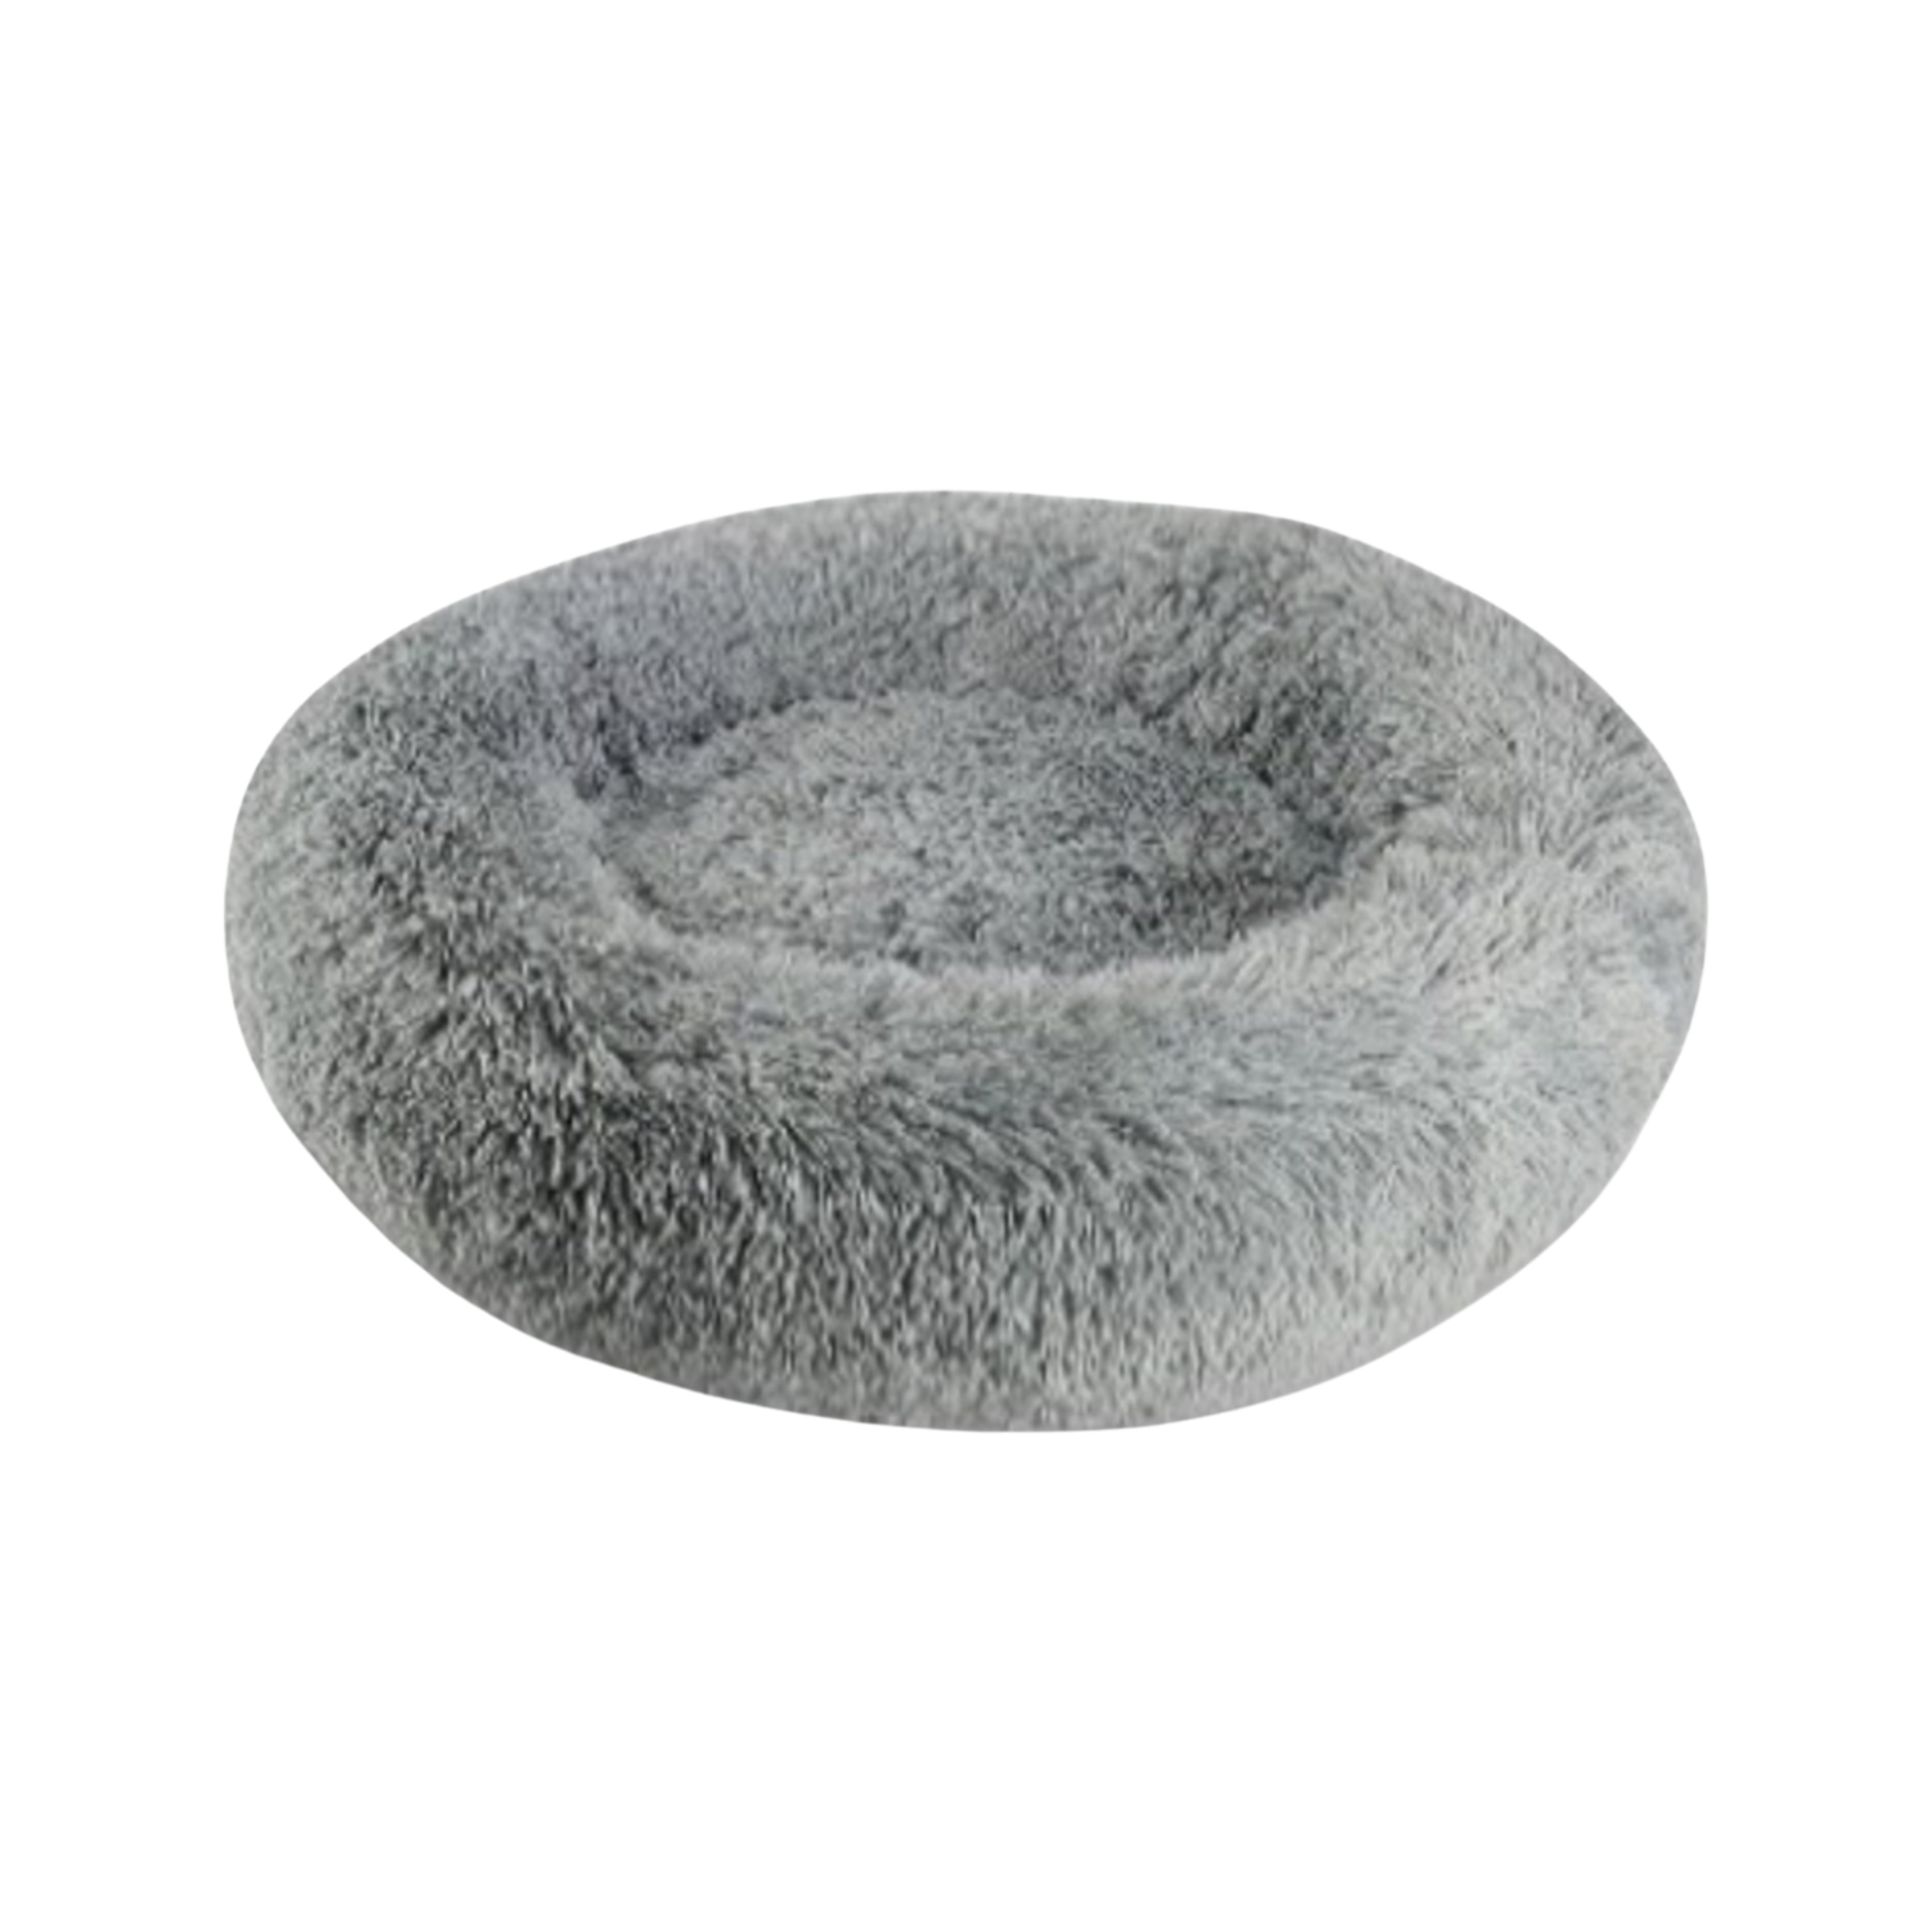 Bowsers Mineral Chenille Donut Dog Bed S